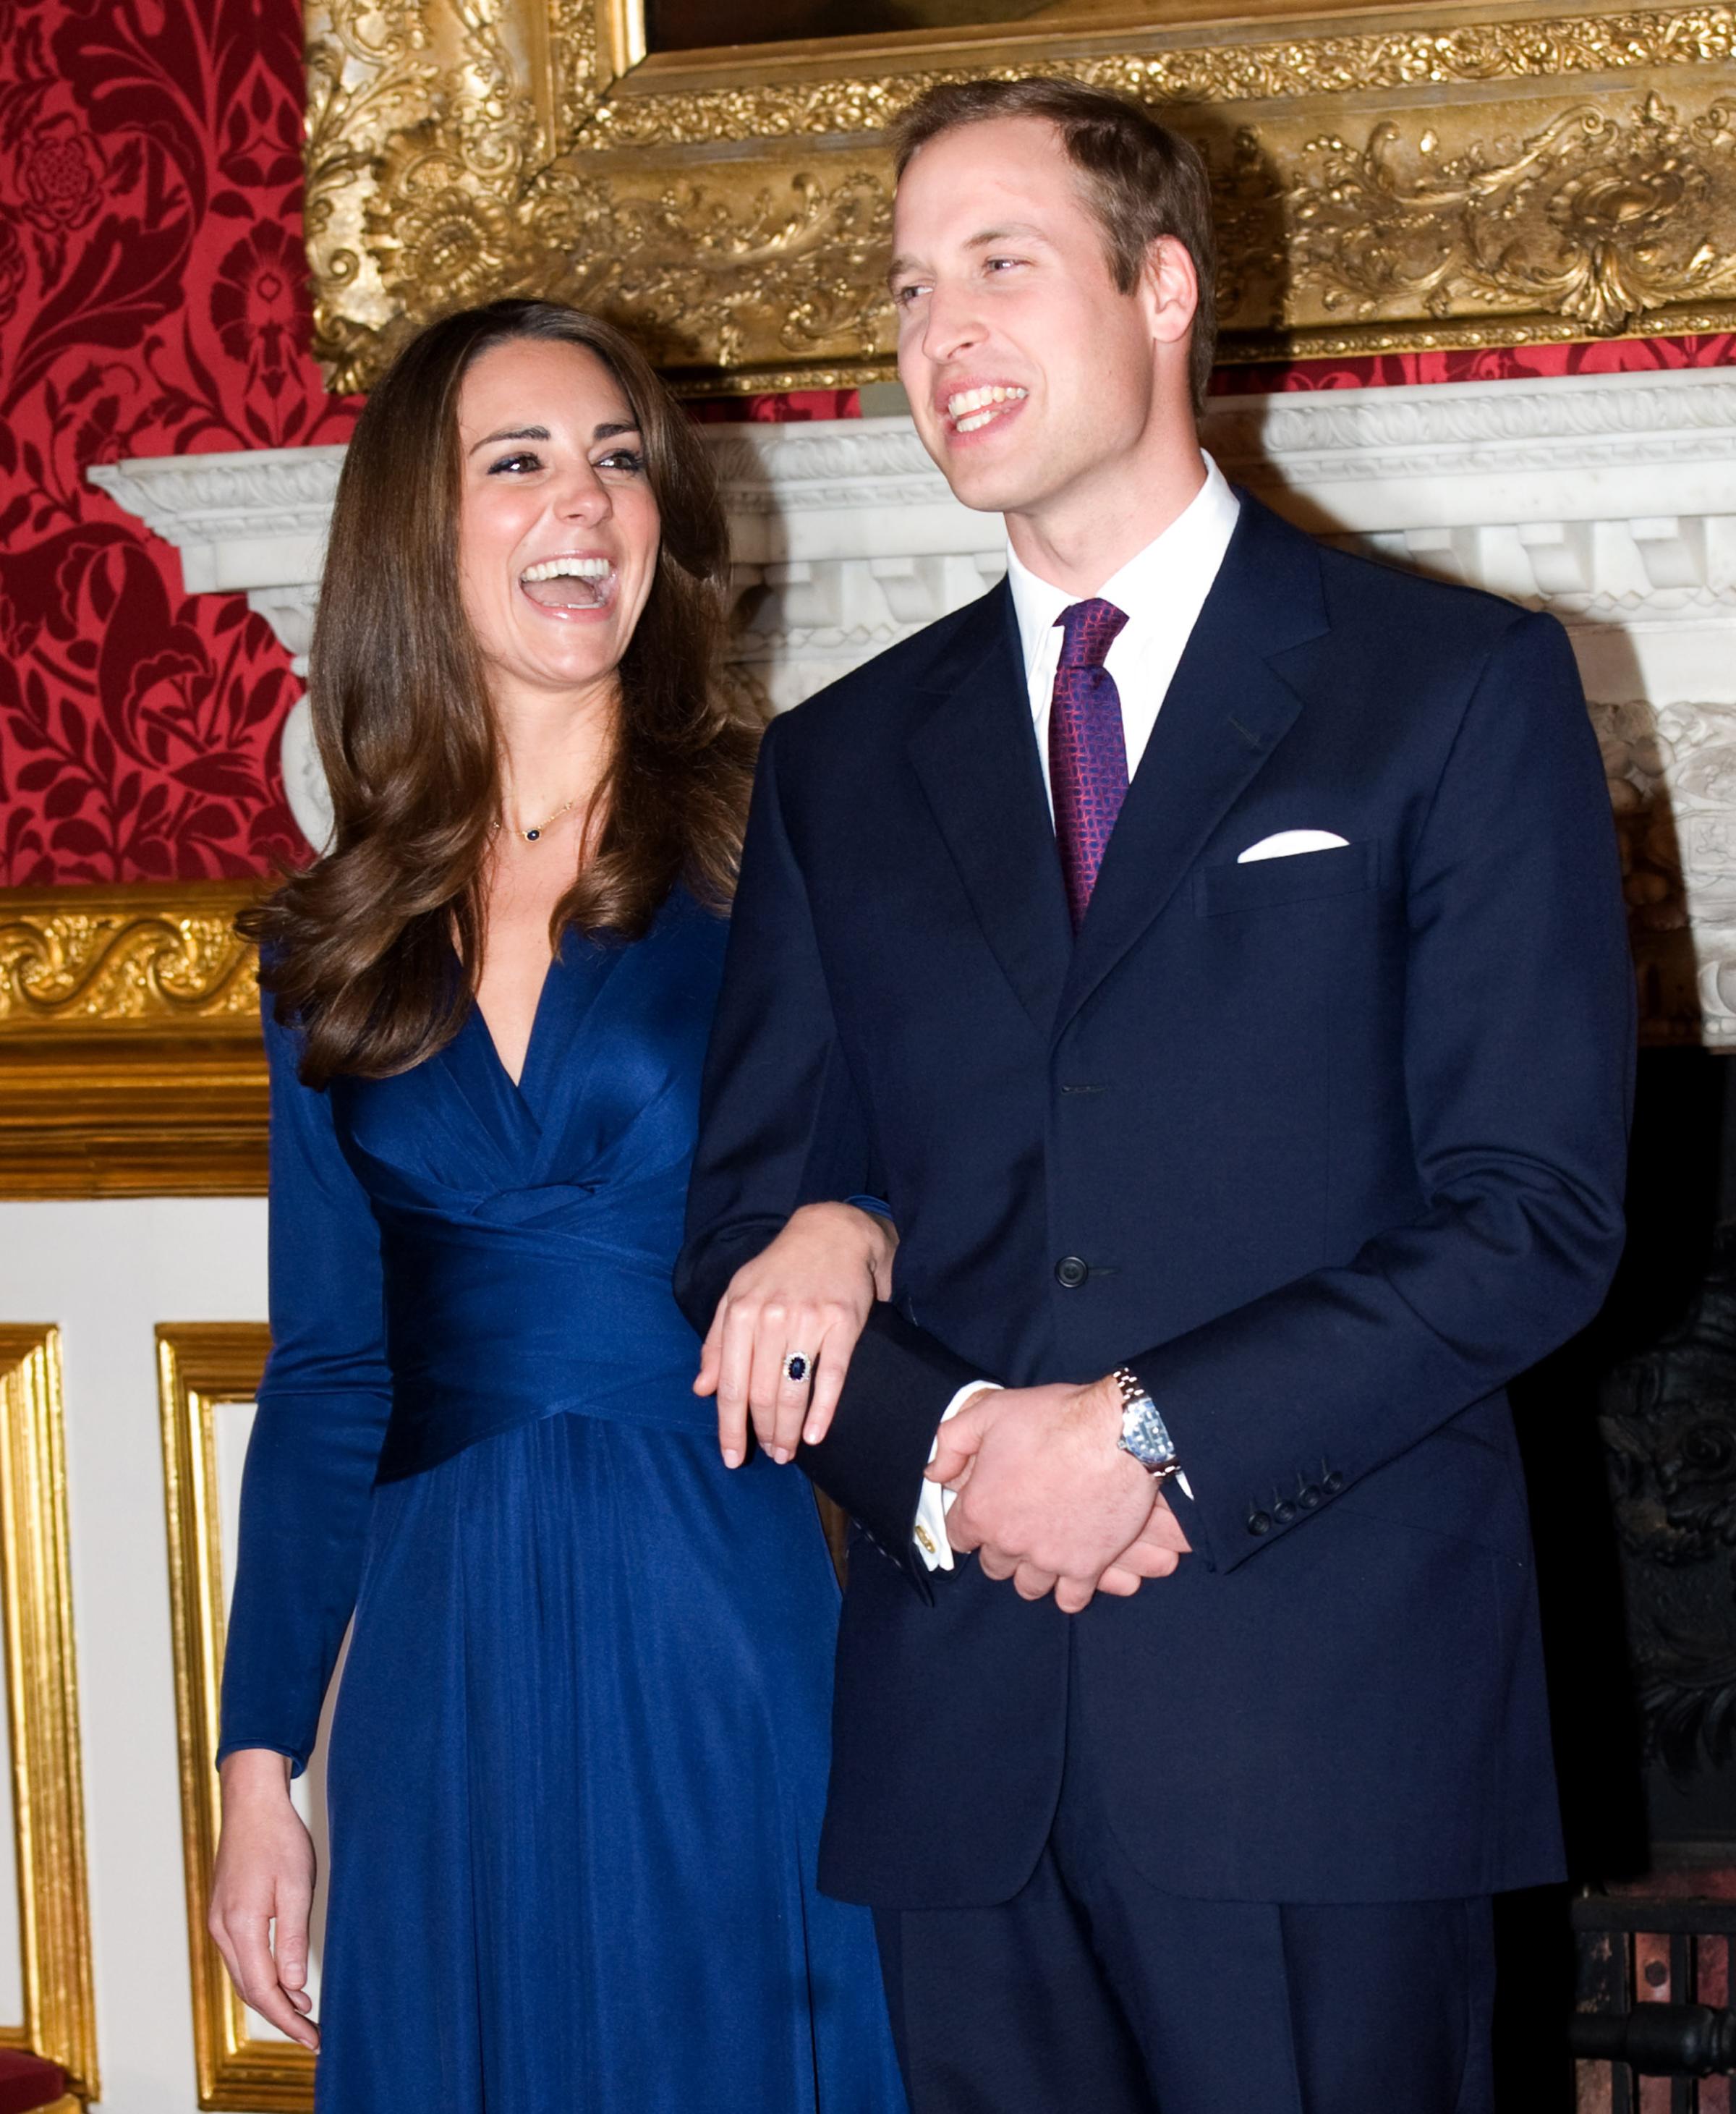 Prince William and Kate Middleton pose for photographs in the State Apartments of St James Palace after announcing their engagement. The couple became engaged during a recent holiday in Kenya having been together for eight years. London, Nov. 16, 2010.